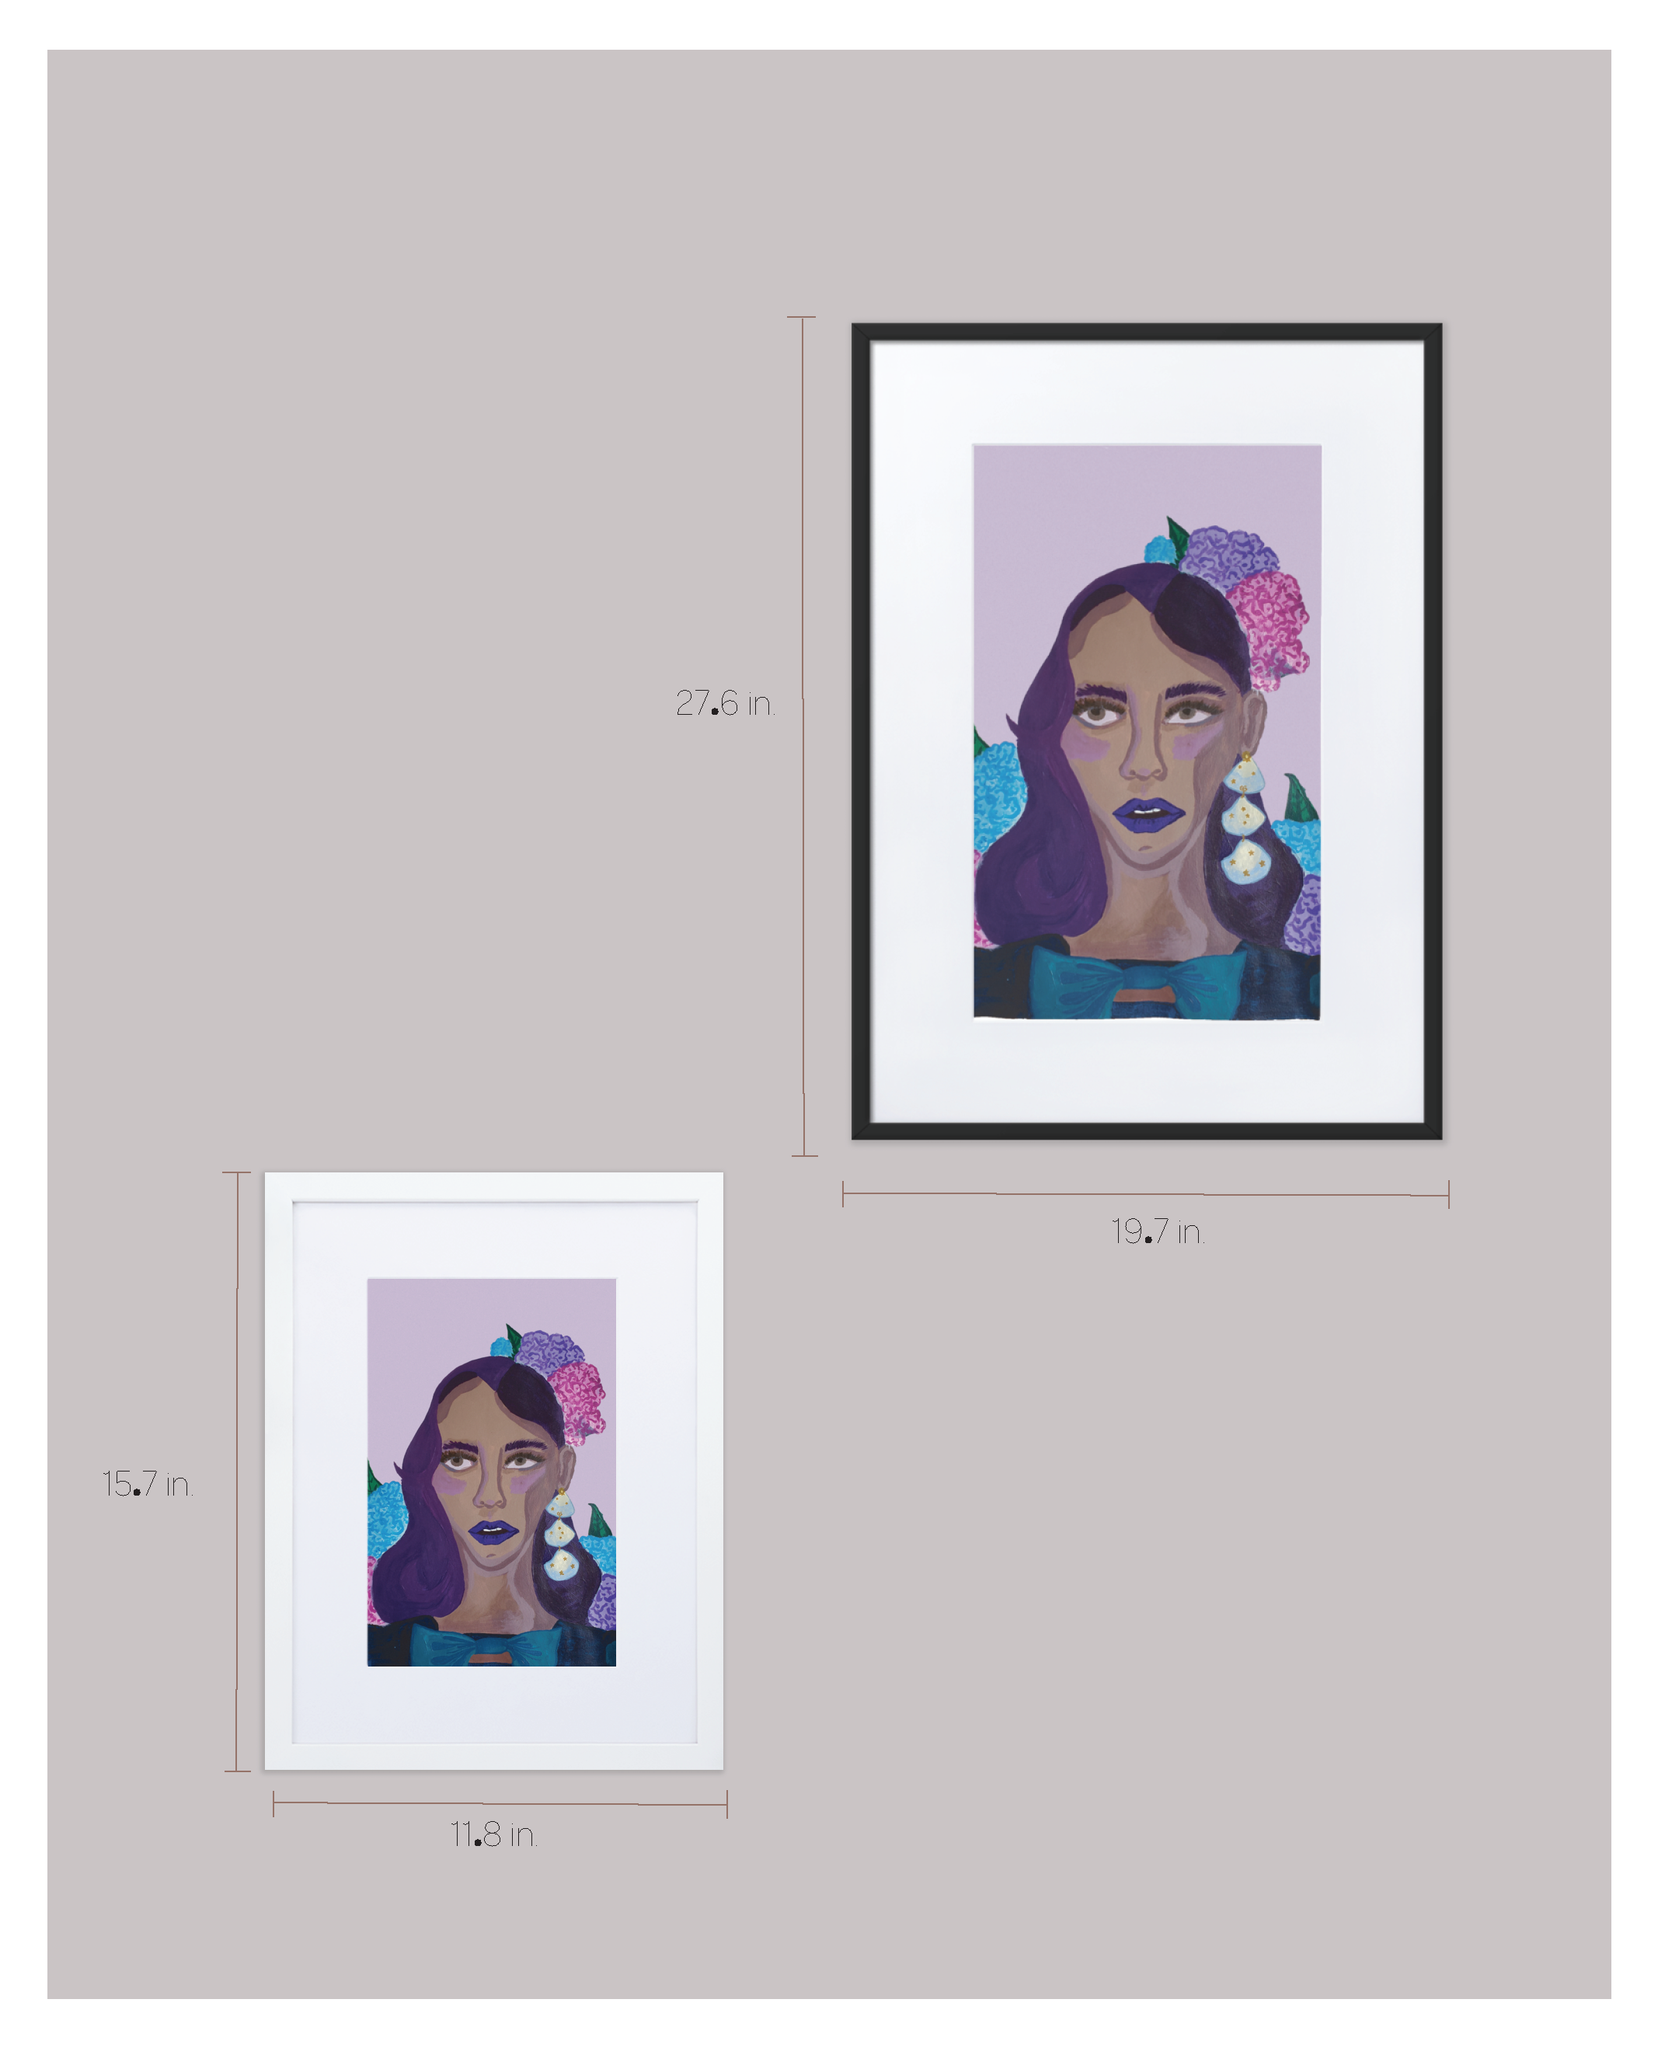 A chart showing the two size options for a framed illustration of a Black woman painted in purple hues and wearing a blue velvet dress and hydrangea flowers in her hair